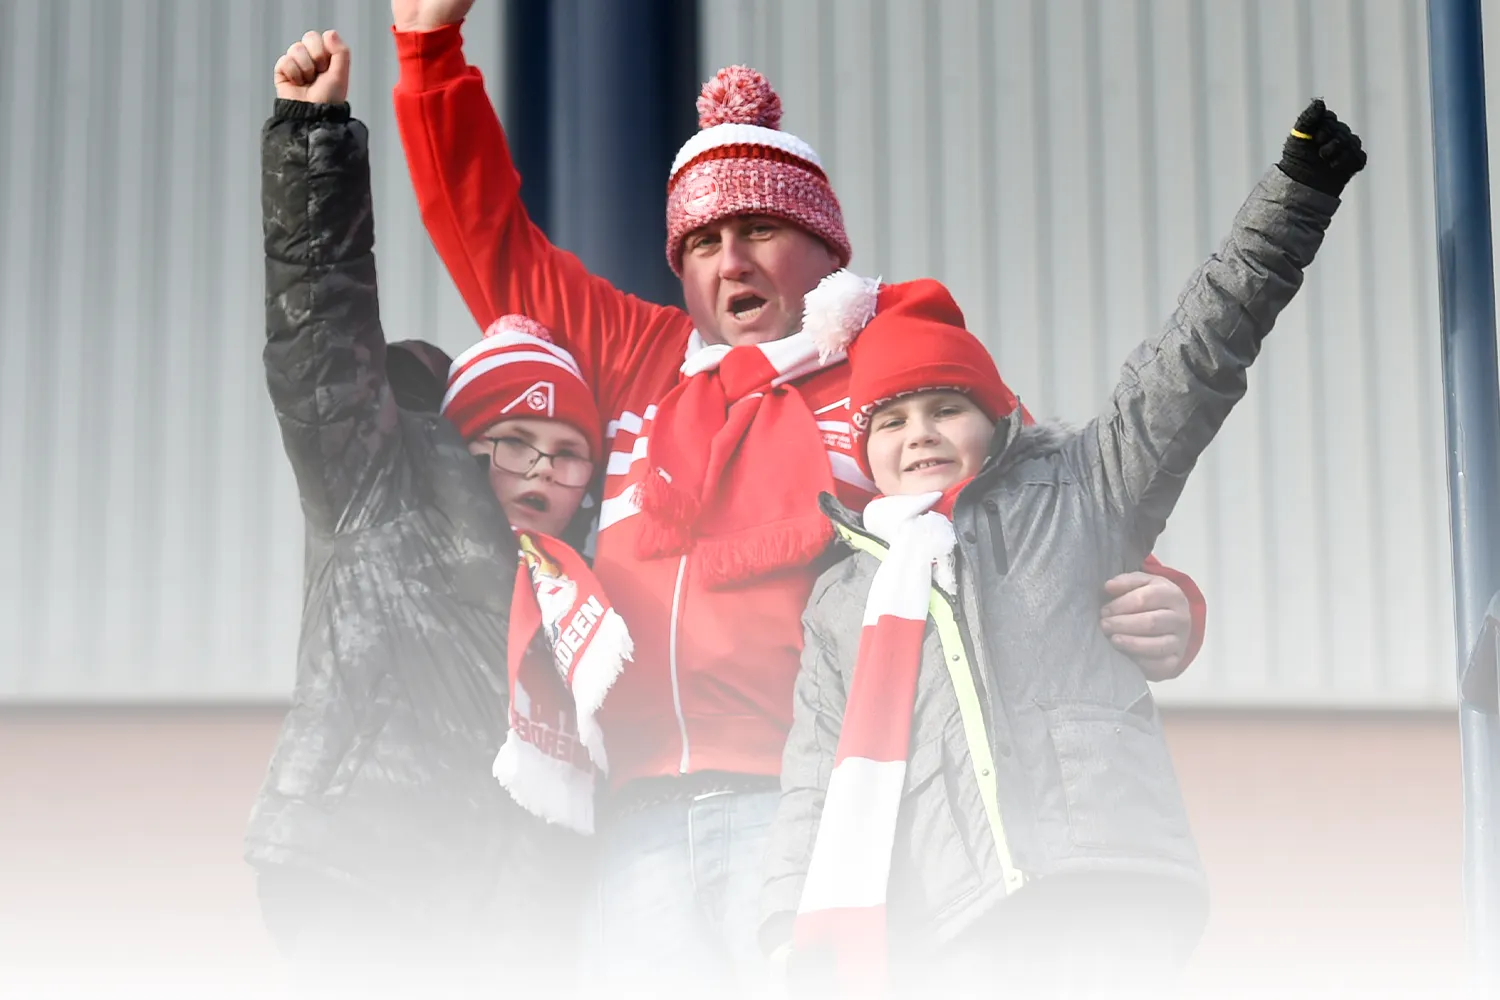 Excited supporters prepare to go into Pittodrie on match day